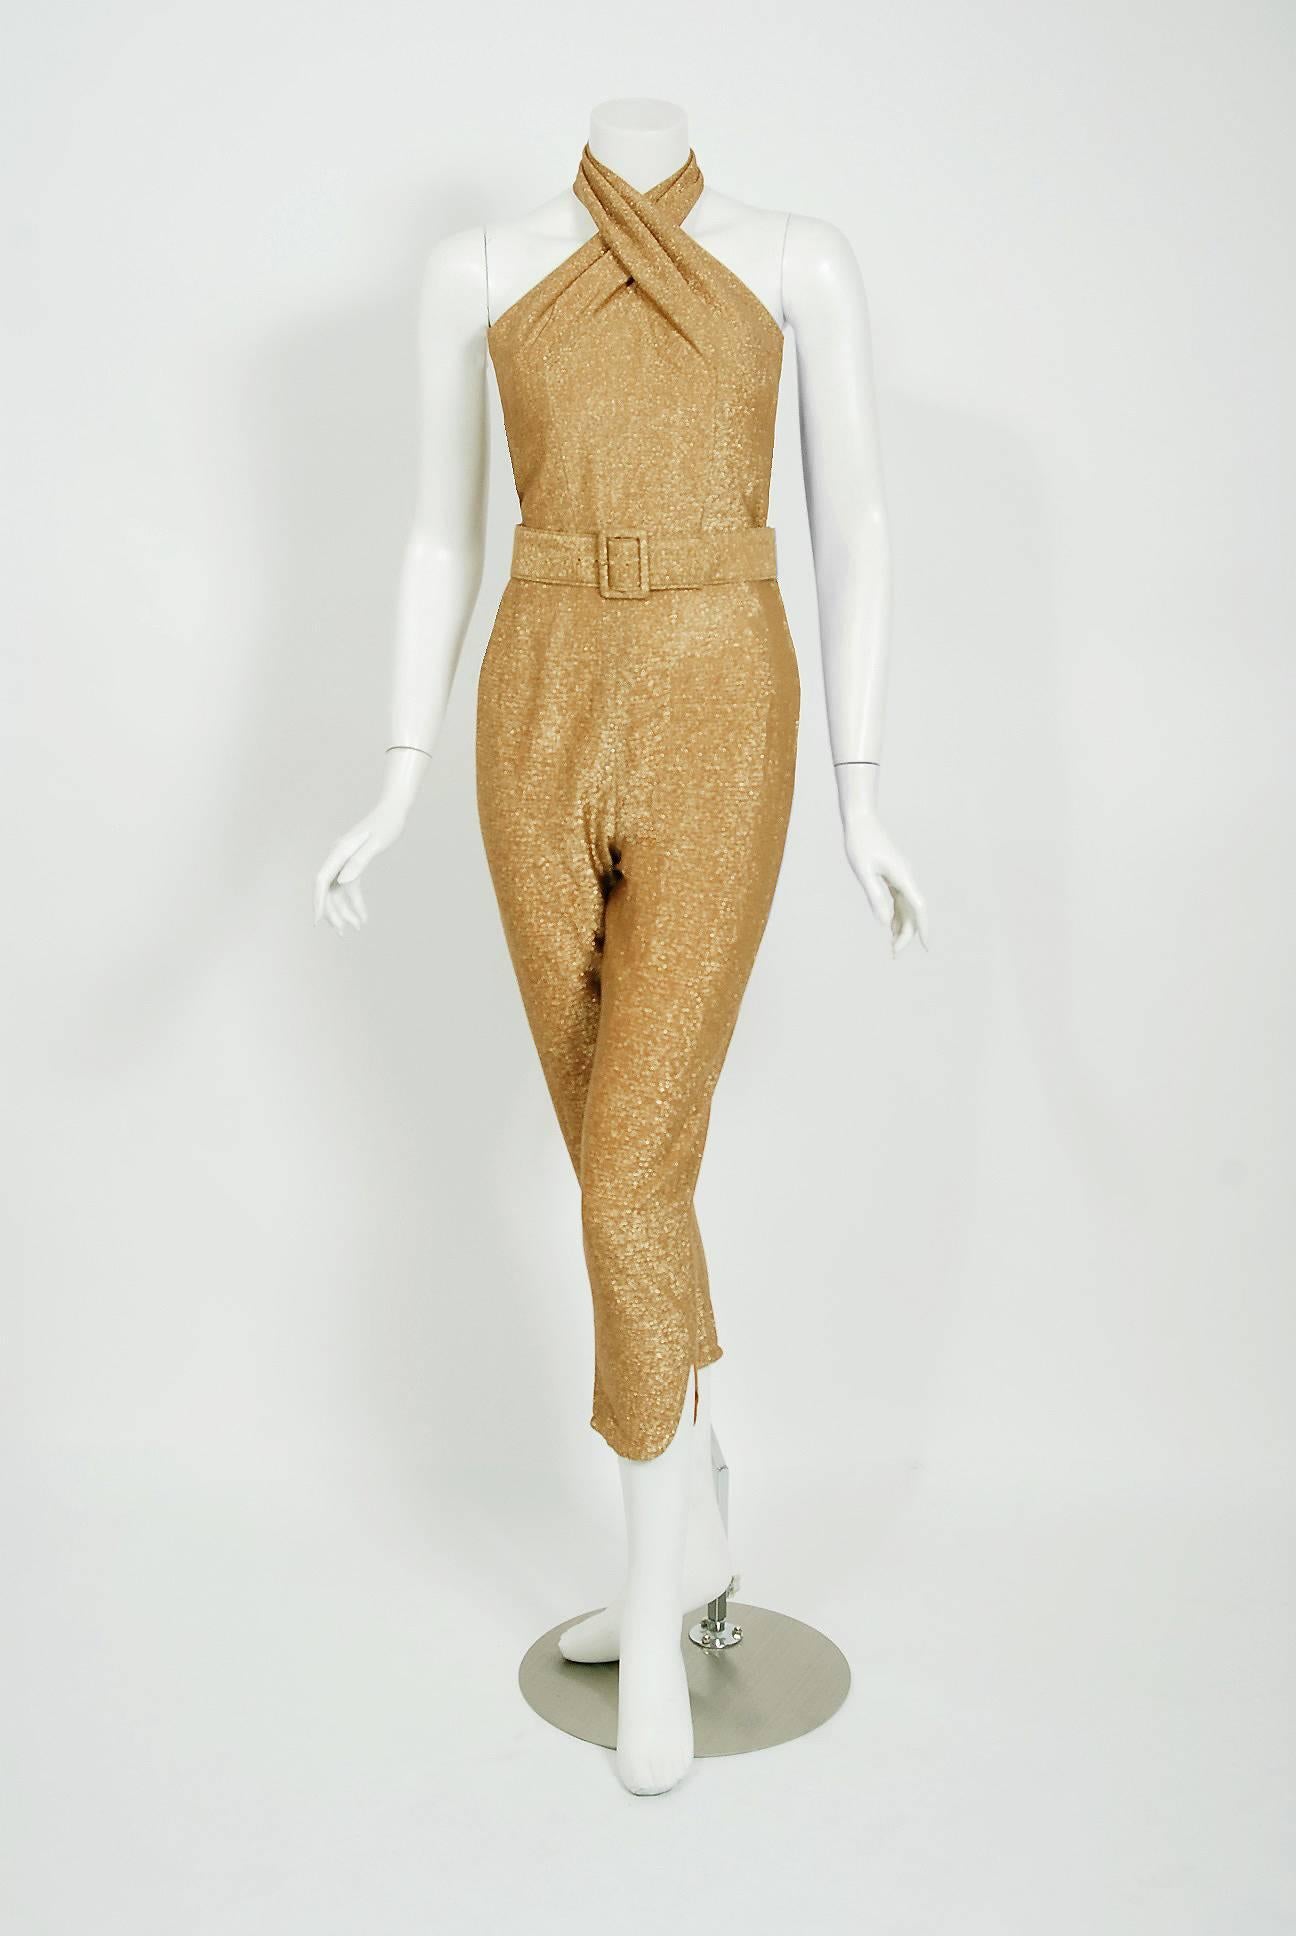 Words can not describe how beautiful this 1950's Gotham Original designer jumpsuit ensemble is! It's fashioned from fully-lined sparkling metallic gold lurex. It is cut in that classic pin-up bombshell style; all curves and sexiness. The blouse has